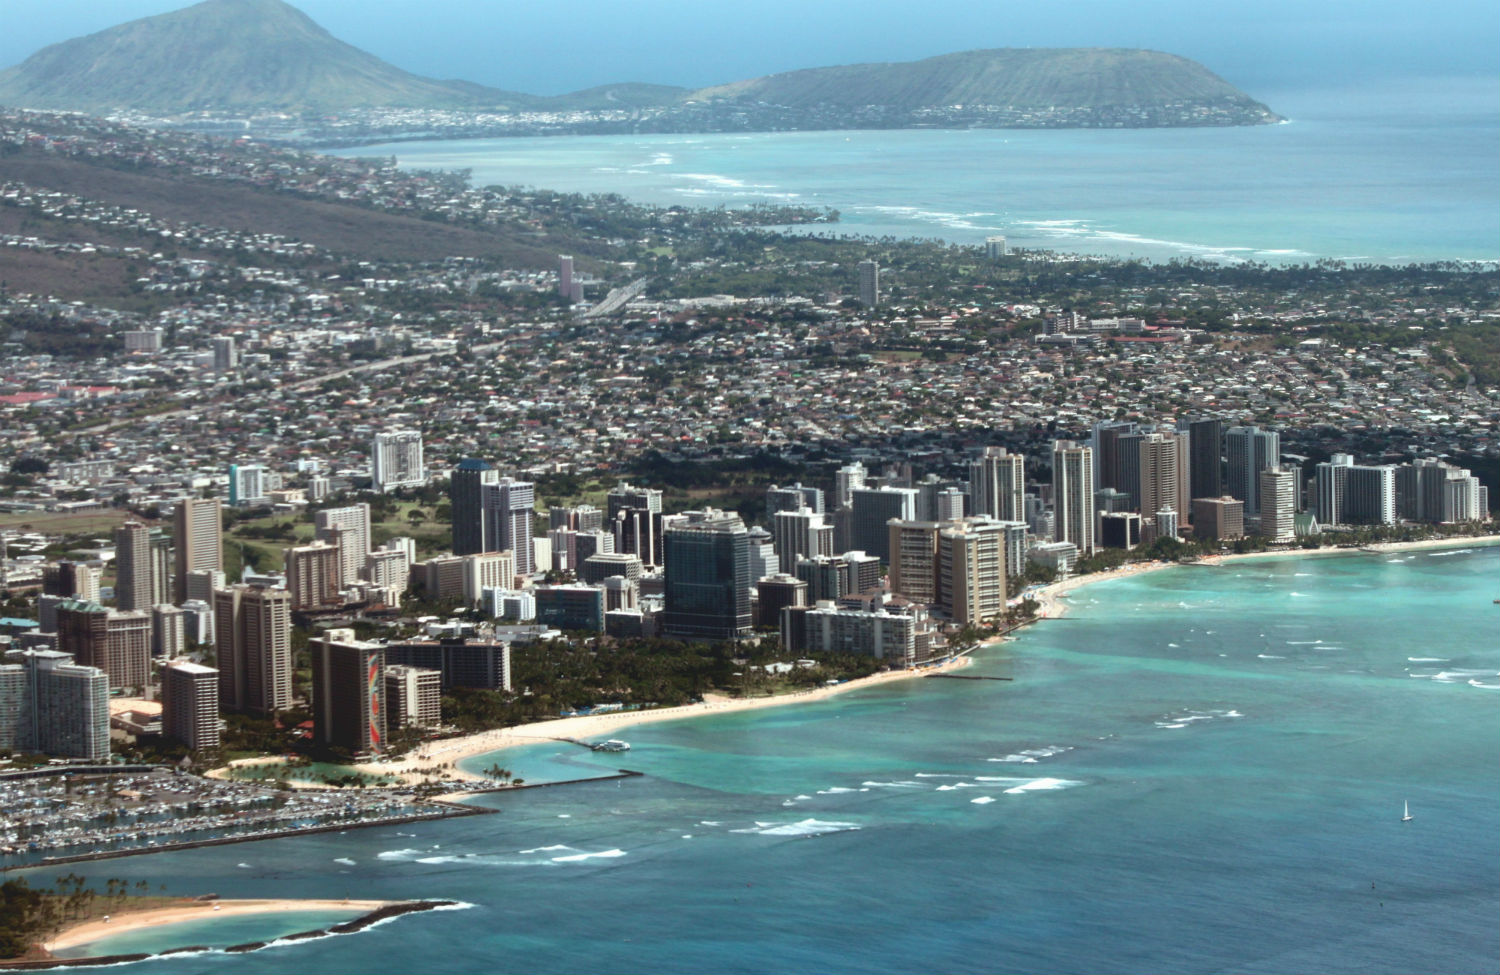 Is Hawai‘i an Occupied State?